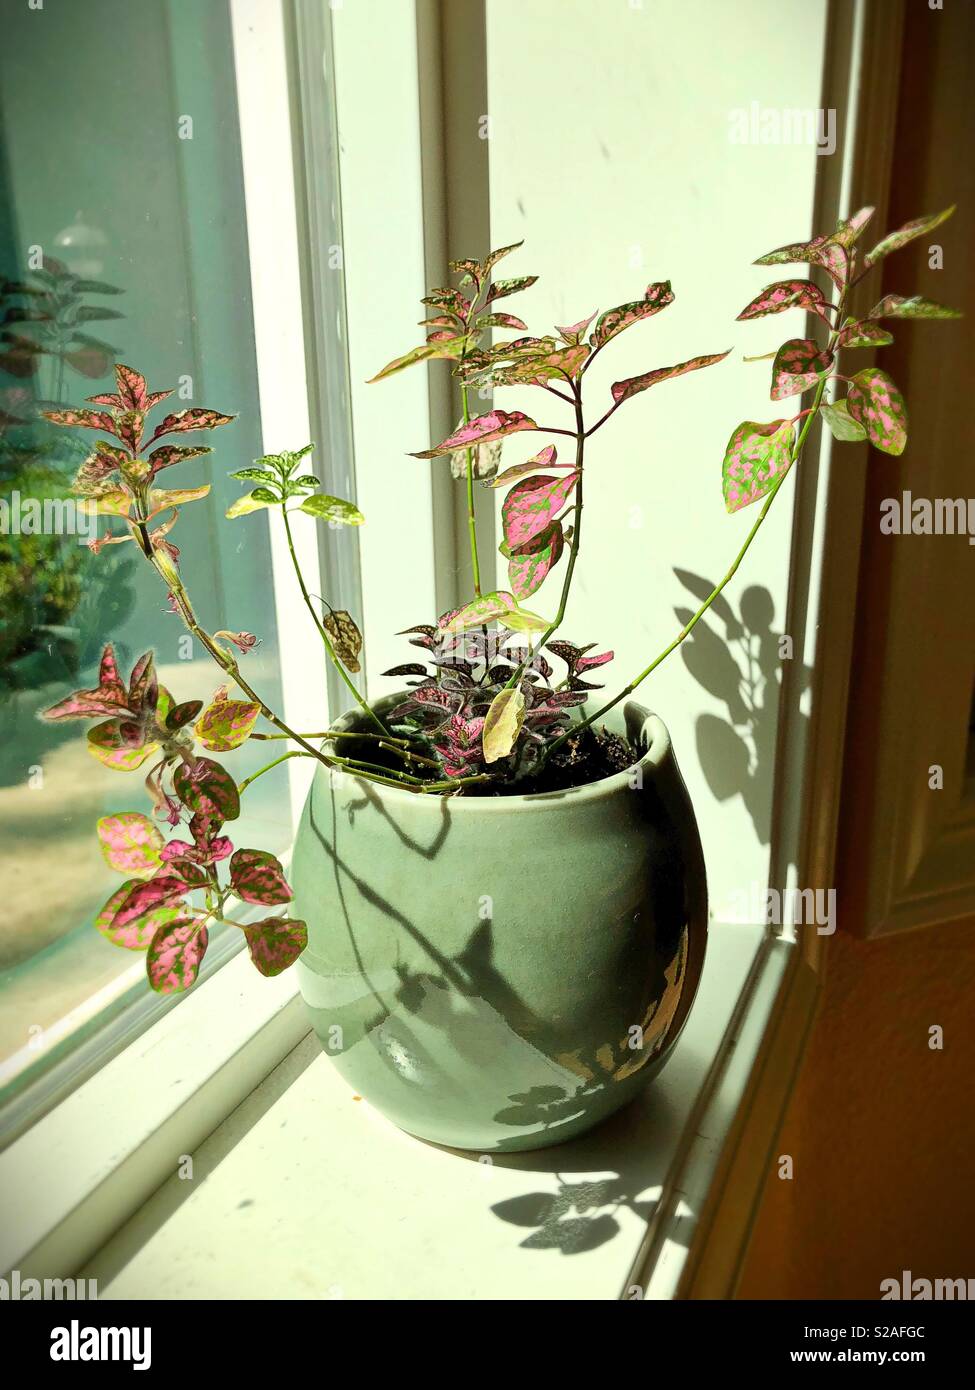 A houseplant with pink and green leaves. Stock Photo